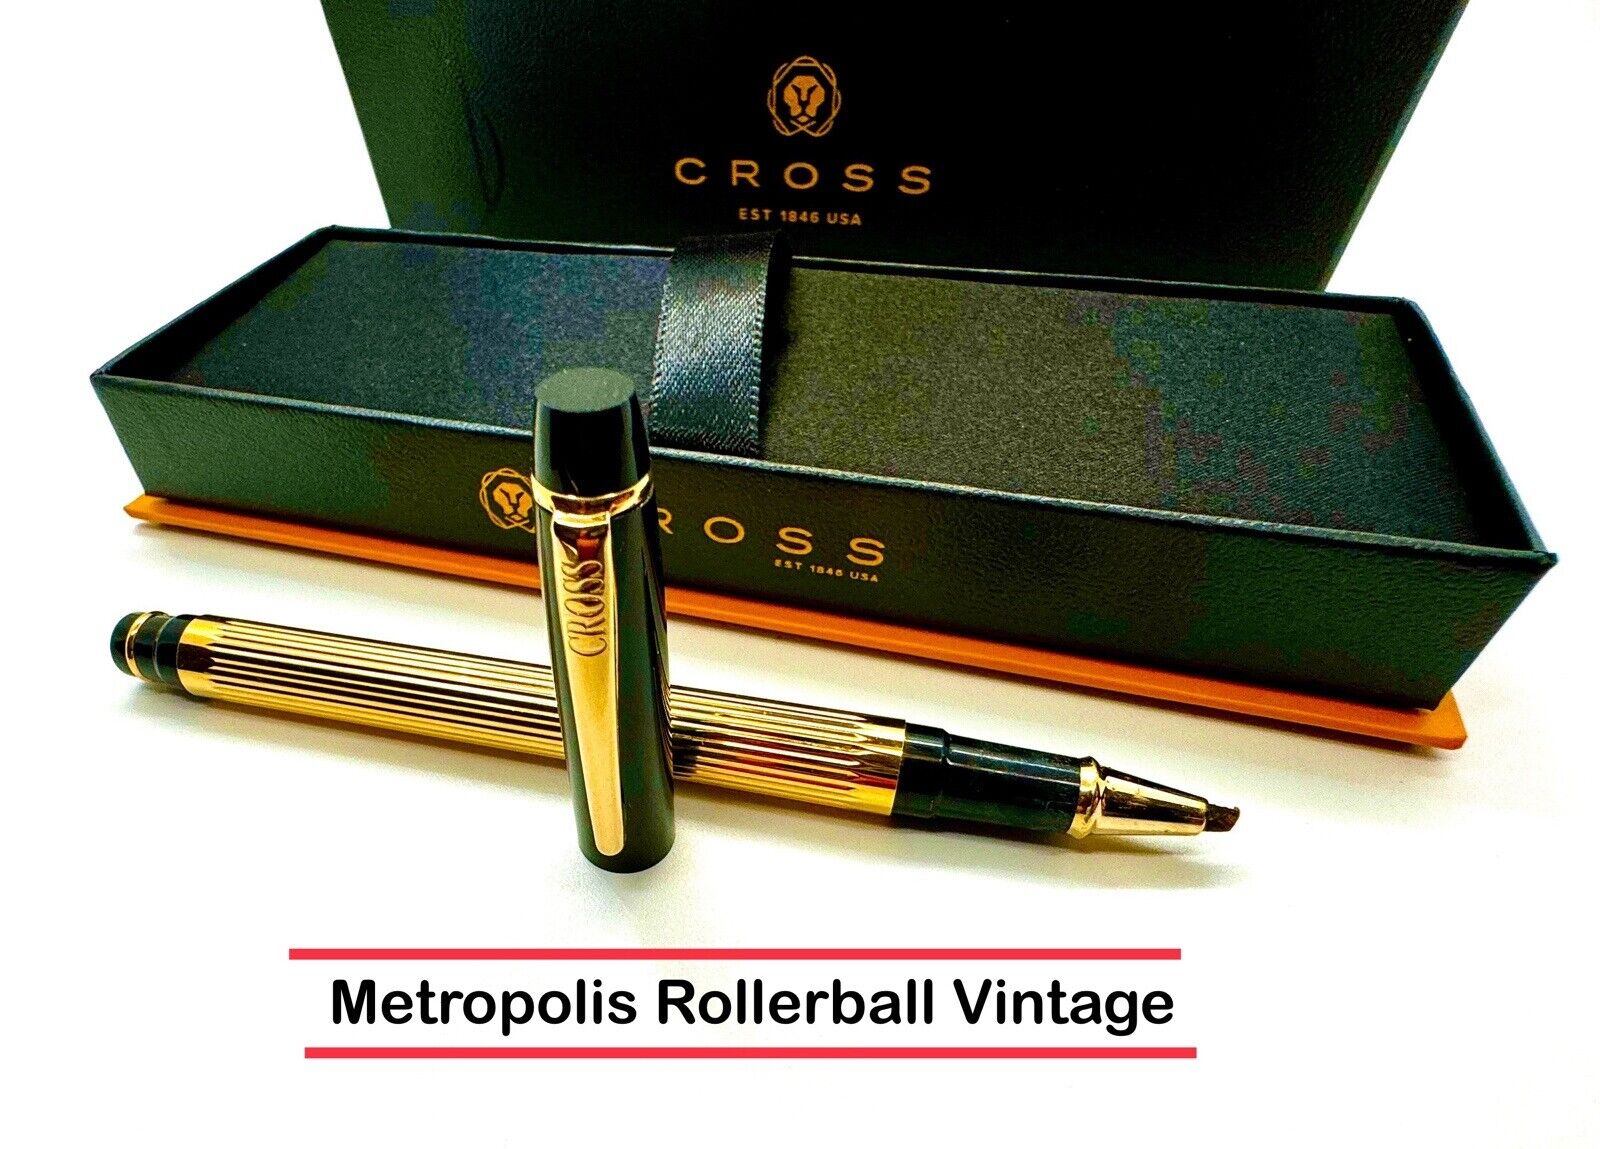 CROSS METROPOLIS Black Lacquer and 23K Gold Plated Rollerball Pen Vintage W/Box